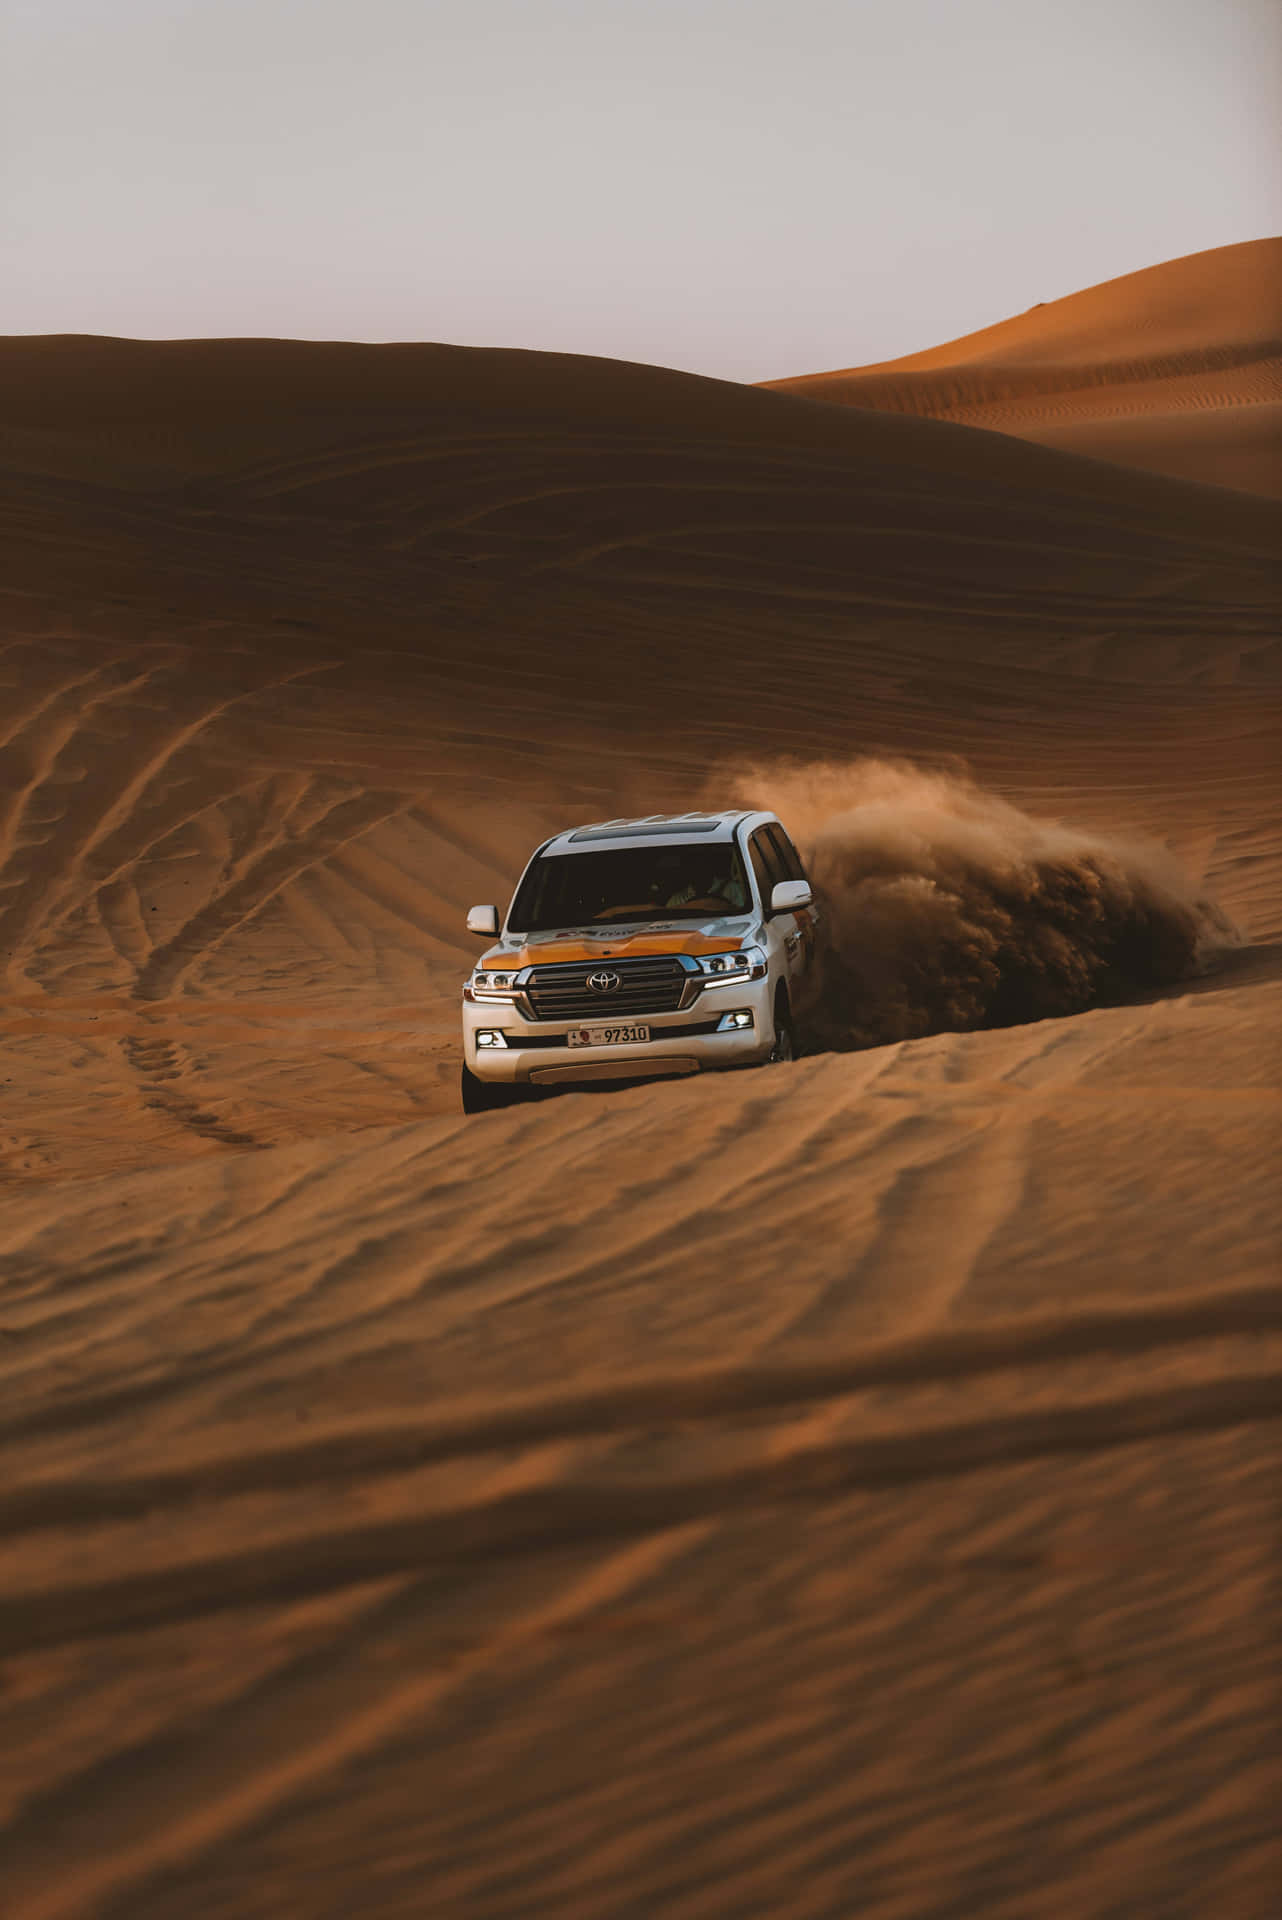 Caption: Majestic 2020 Toyota Land Cruiser In Its Element Wallpaper